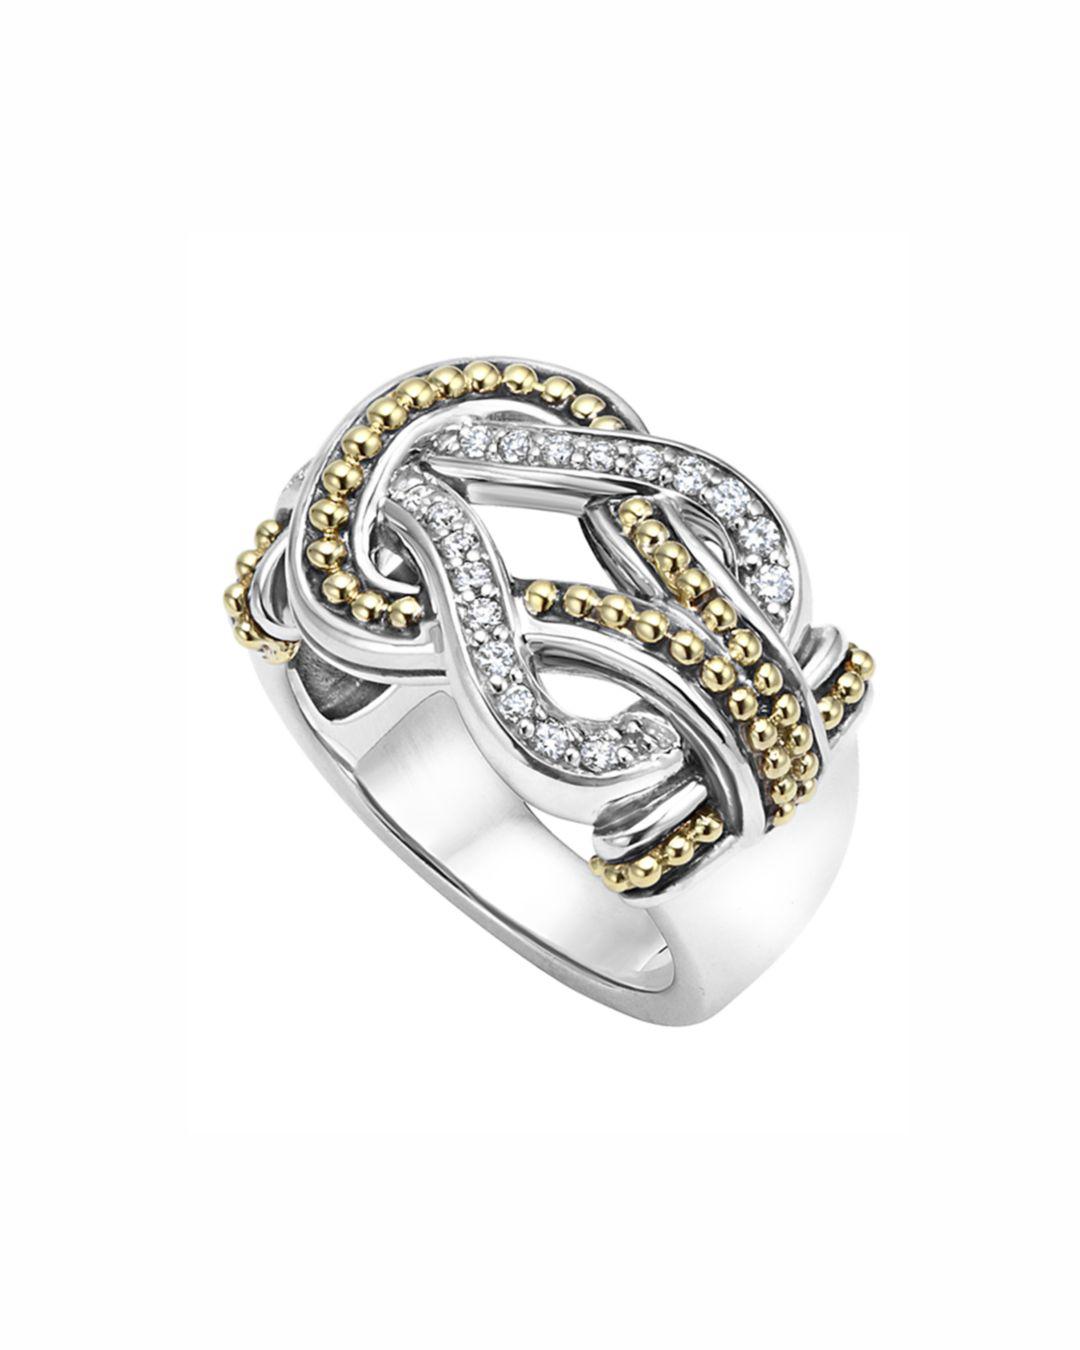 Lyst - Lagos Sterling Silver And 18k Gold Newport Diamond Ring in Metallic